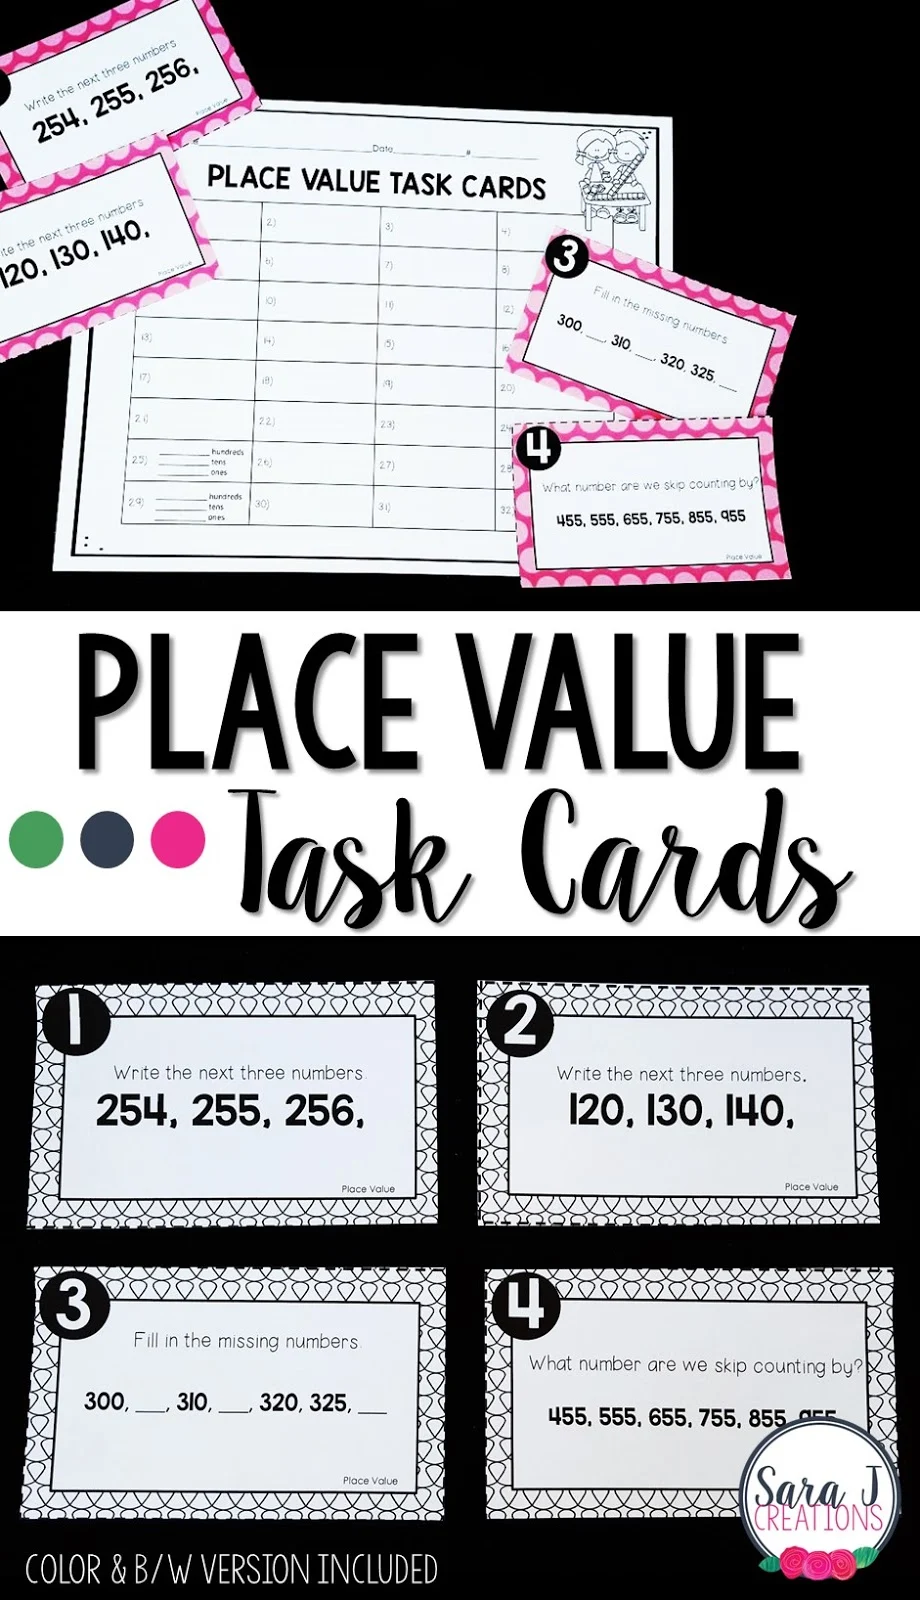 Place value task cards - a practicing place value activity for 2nd grade